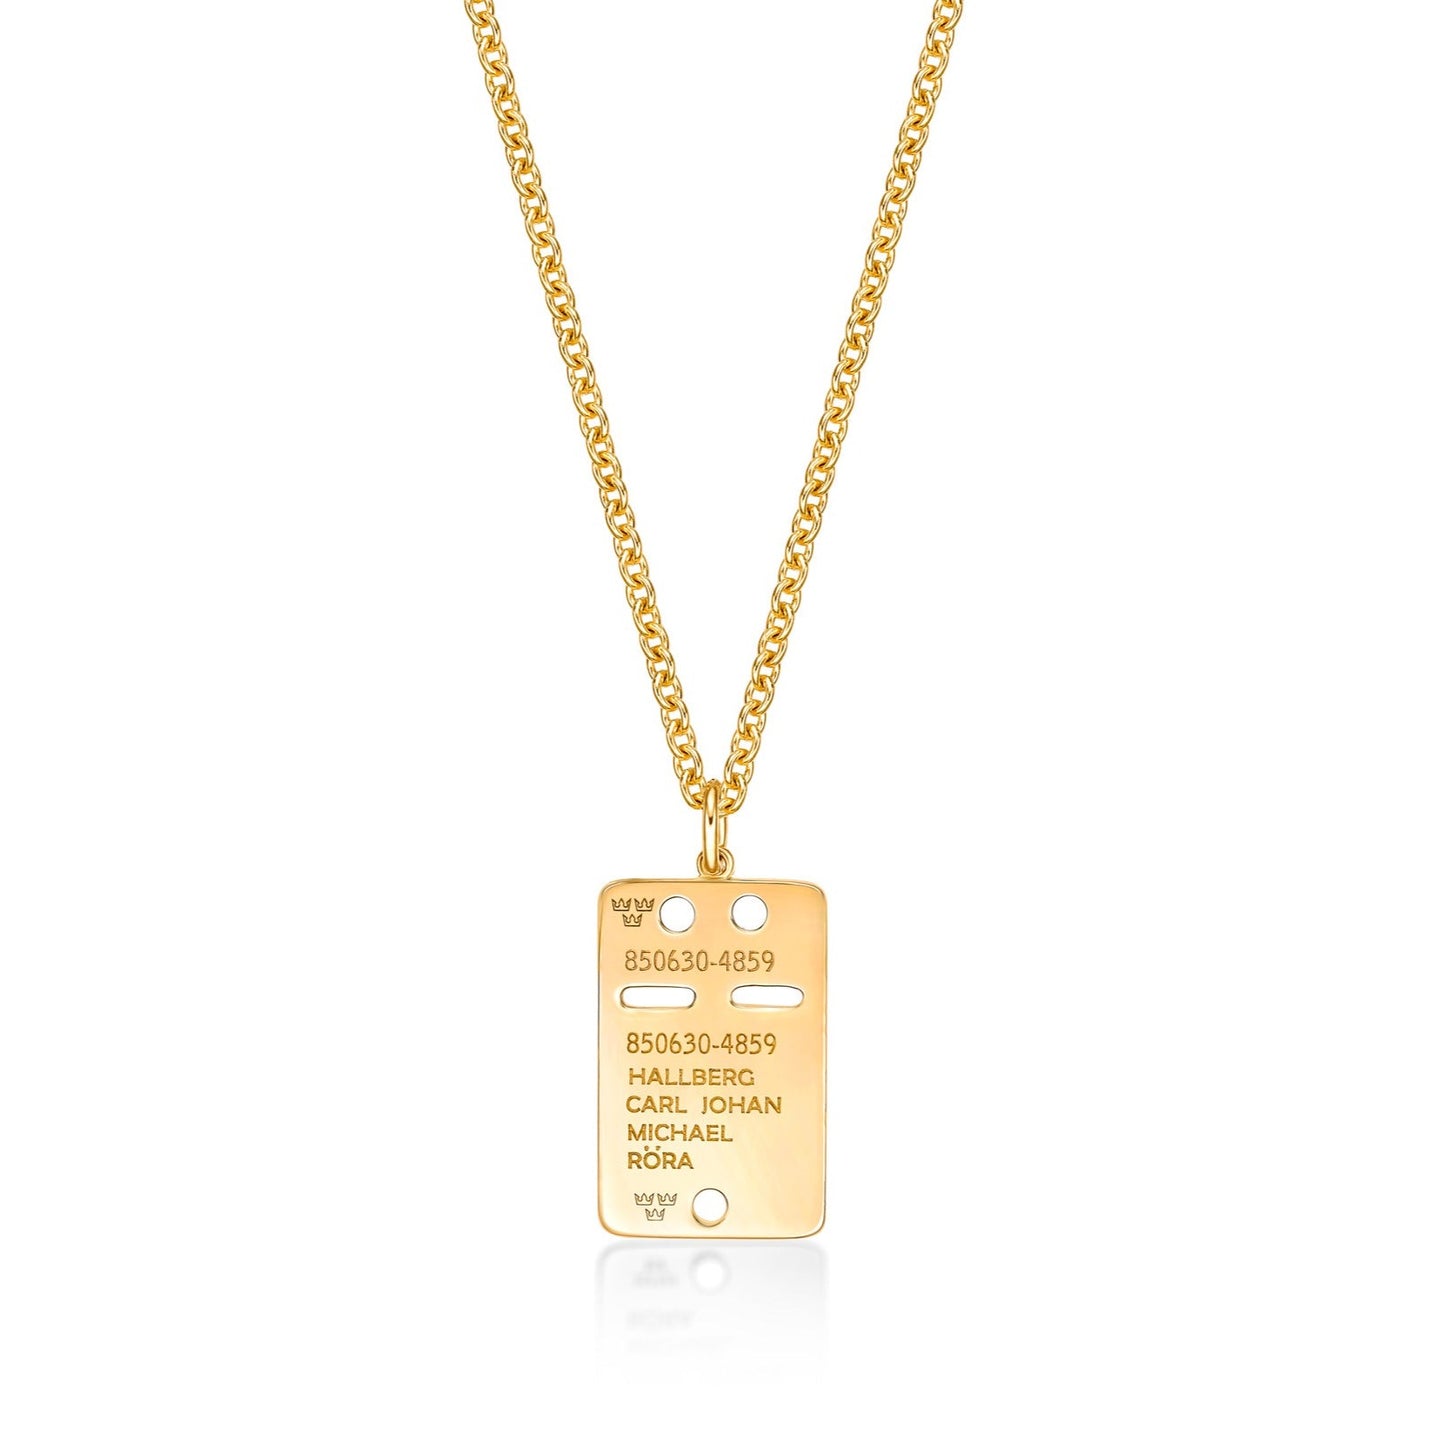 18K Yellow Gold Men's Tag and Raffle Pendant with custom engraving on a 25 inch chain